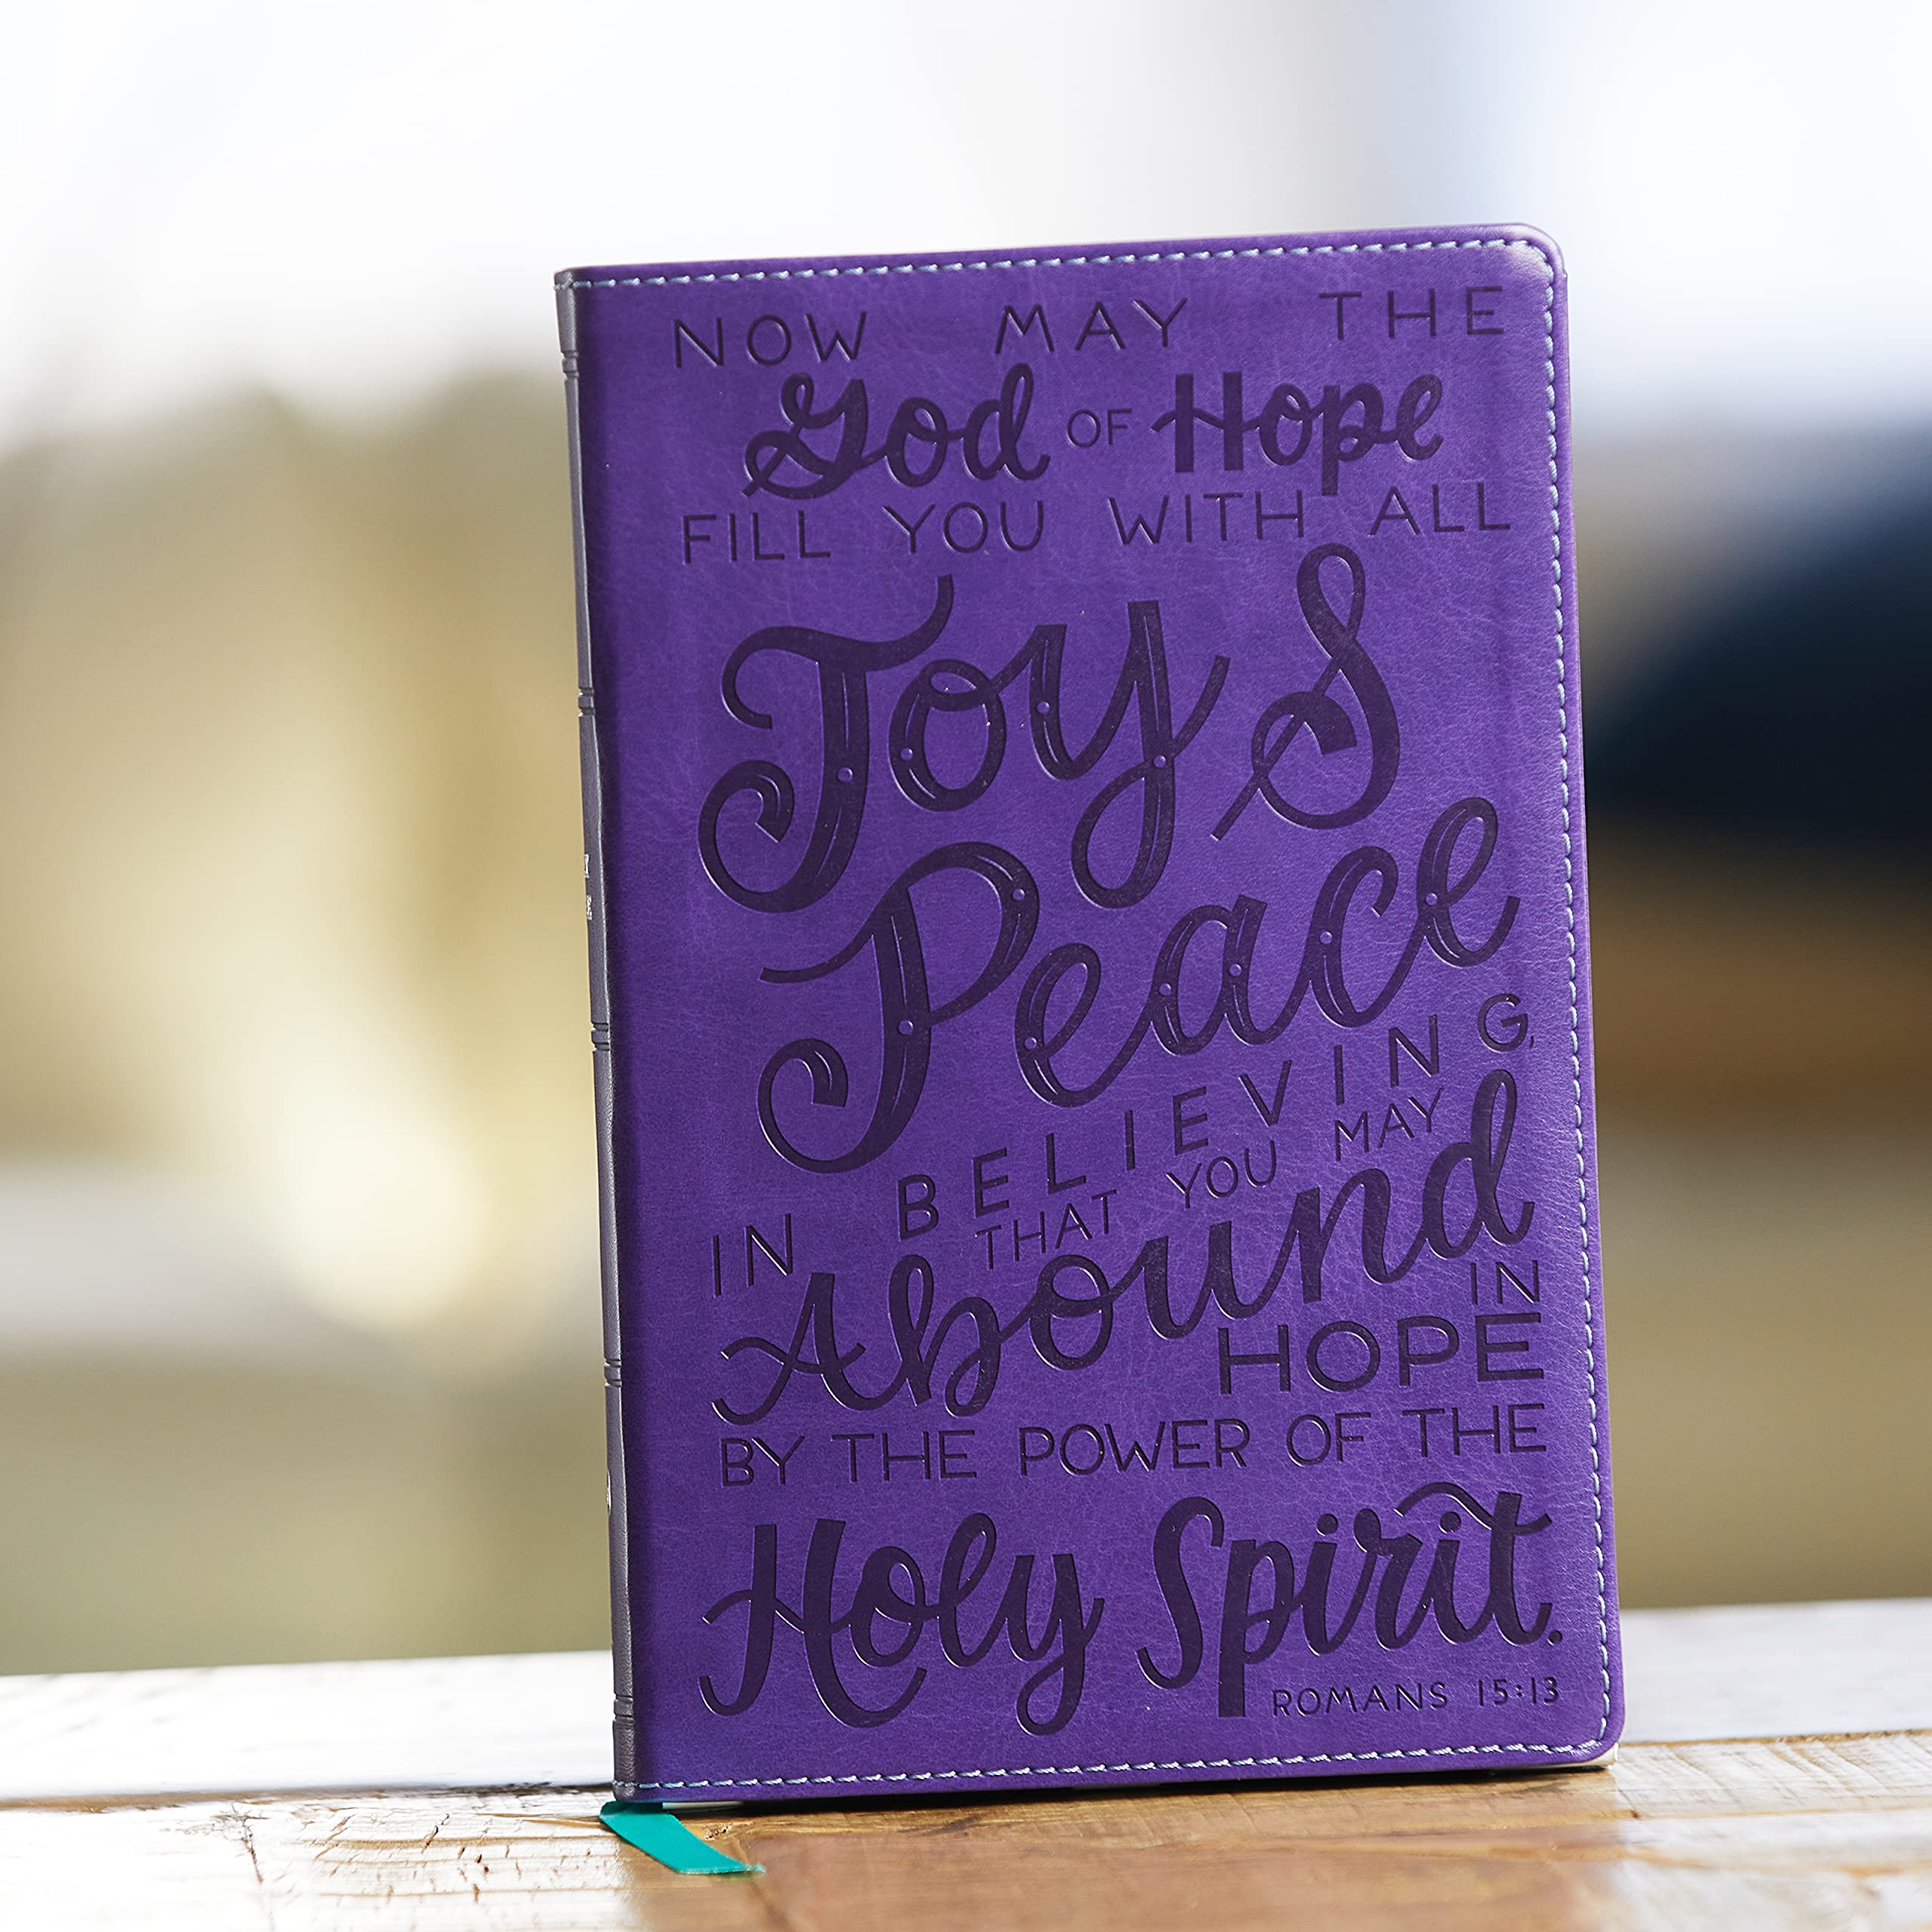 NKJV, Holy Bible for Kids, Verse Art Cover Collection, Leathersoft, Purple, Comfort Print: Holy Bible, New King James Version